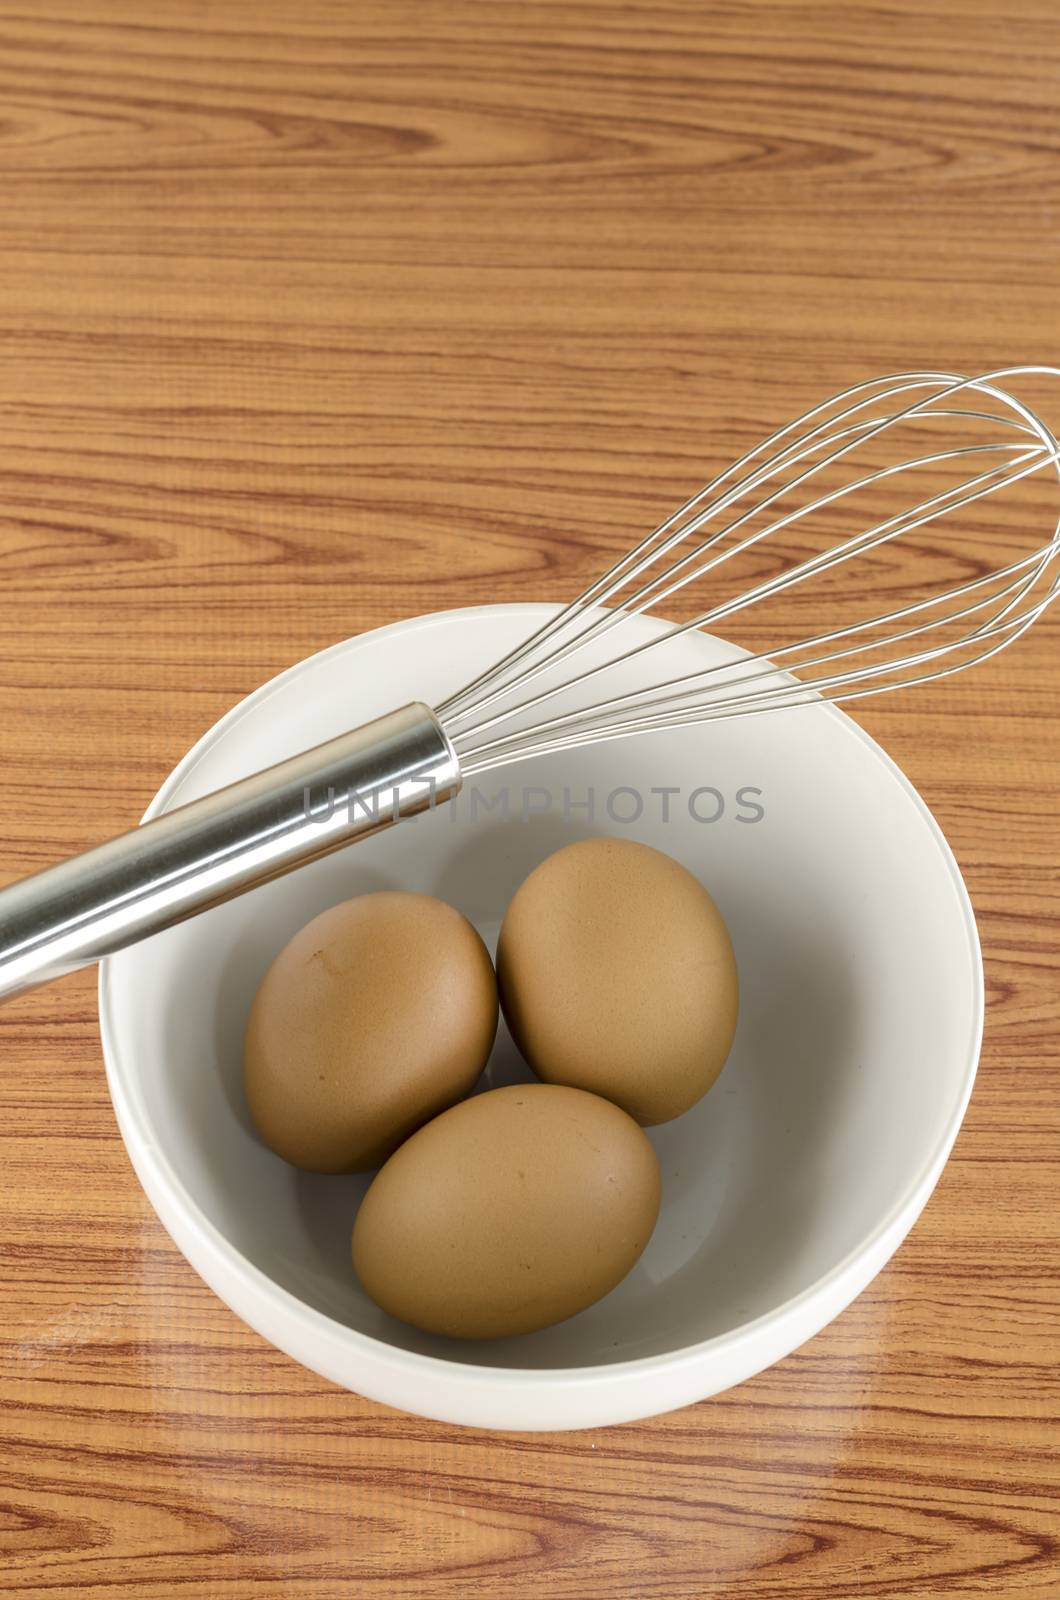 whisk and egg in white bowl on wood table background